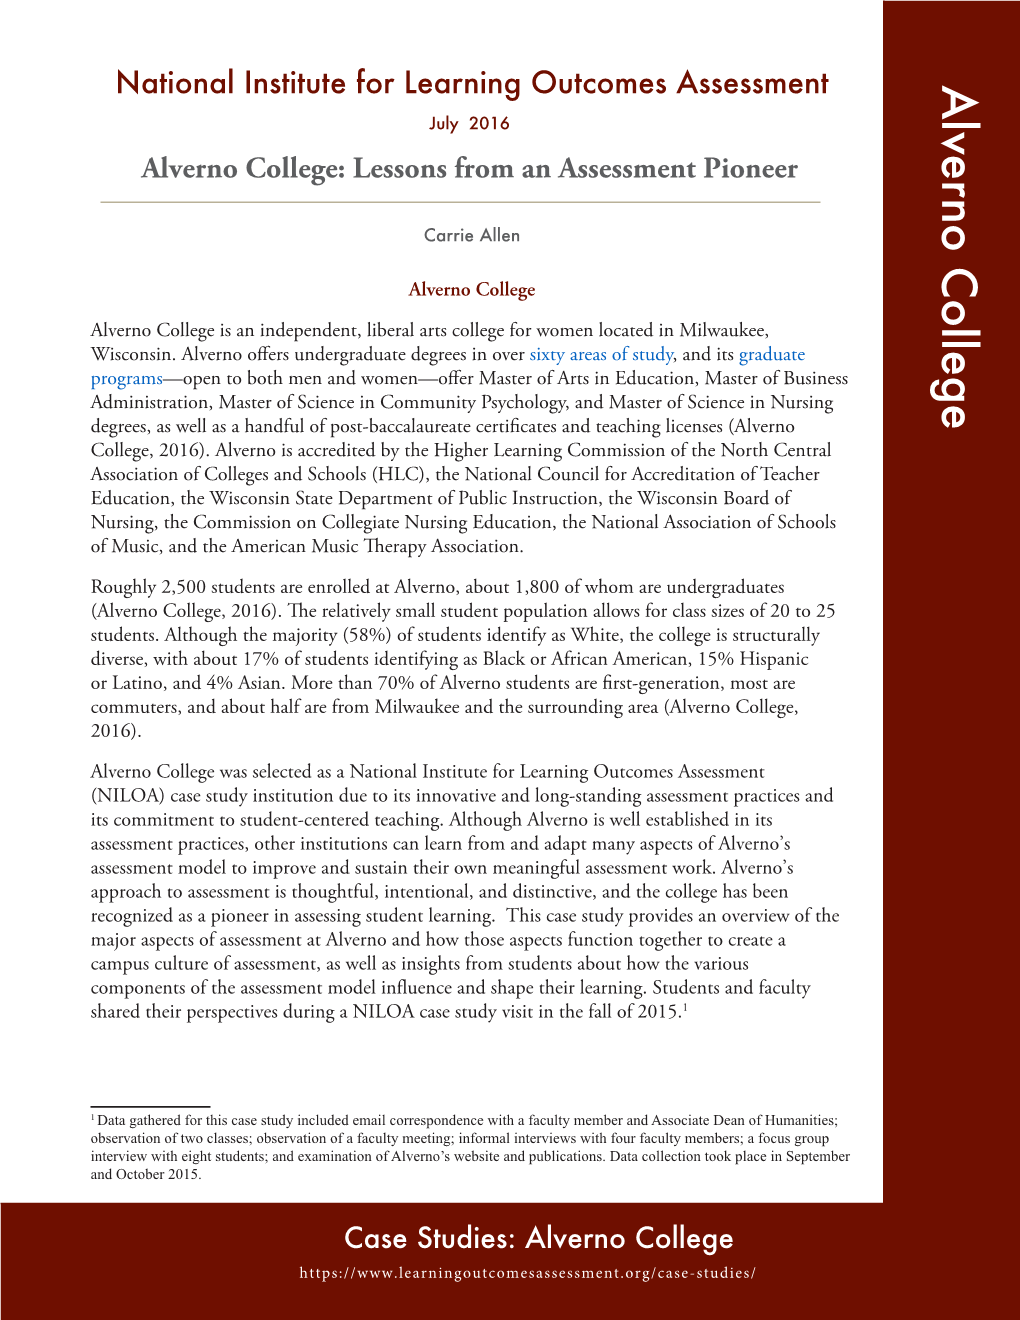 Alverno College: Lessons from an Assessment Pioneer